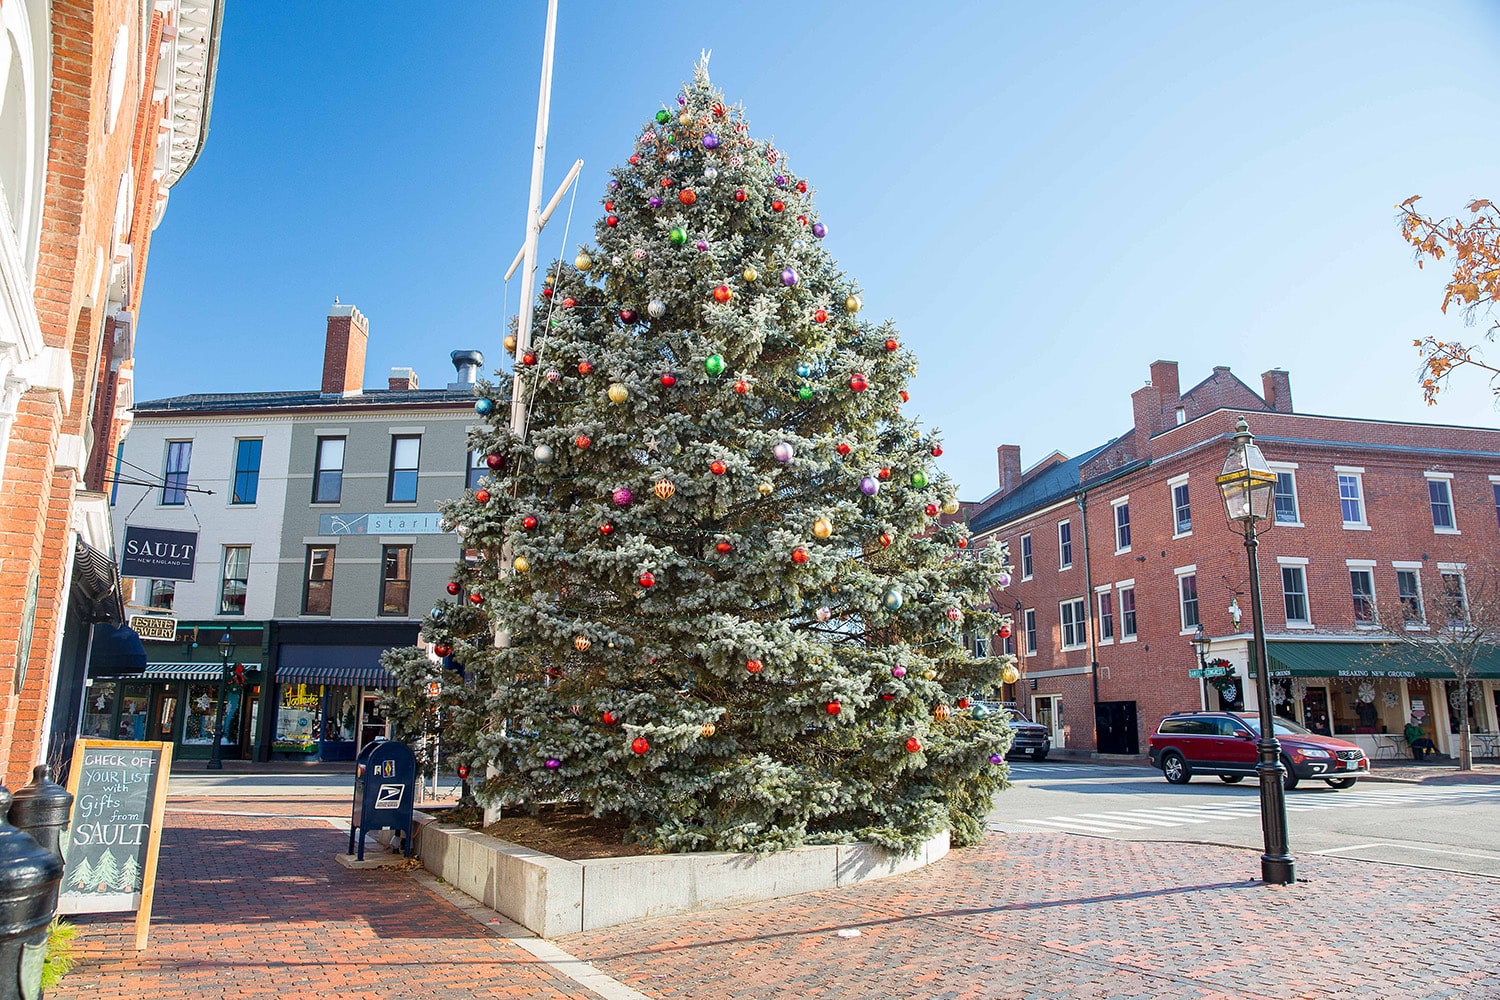 image of down town Portsmouth's Christmas tree